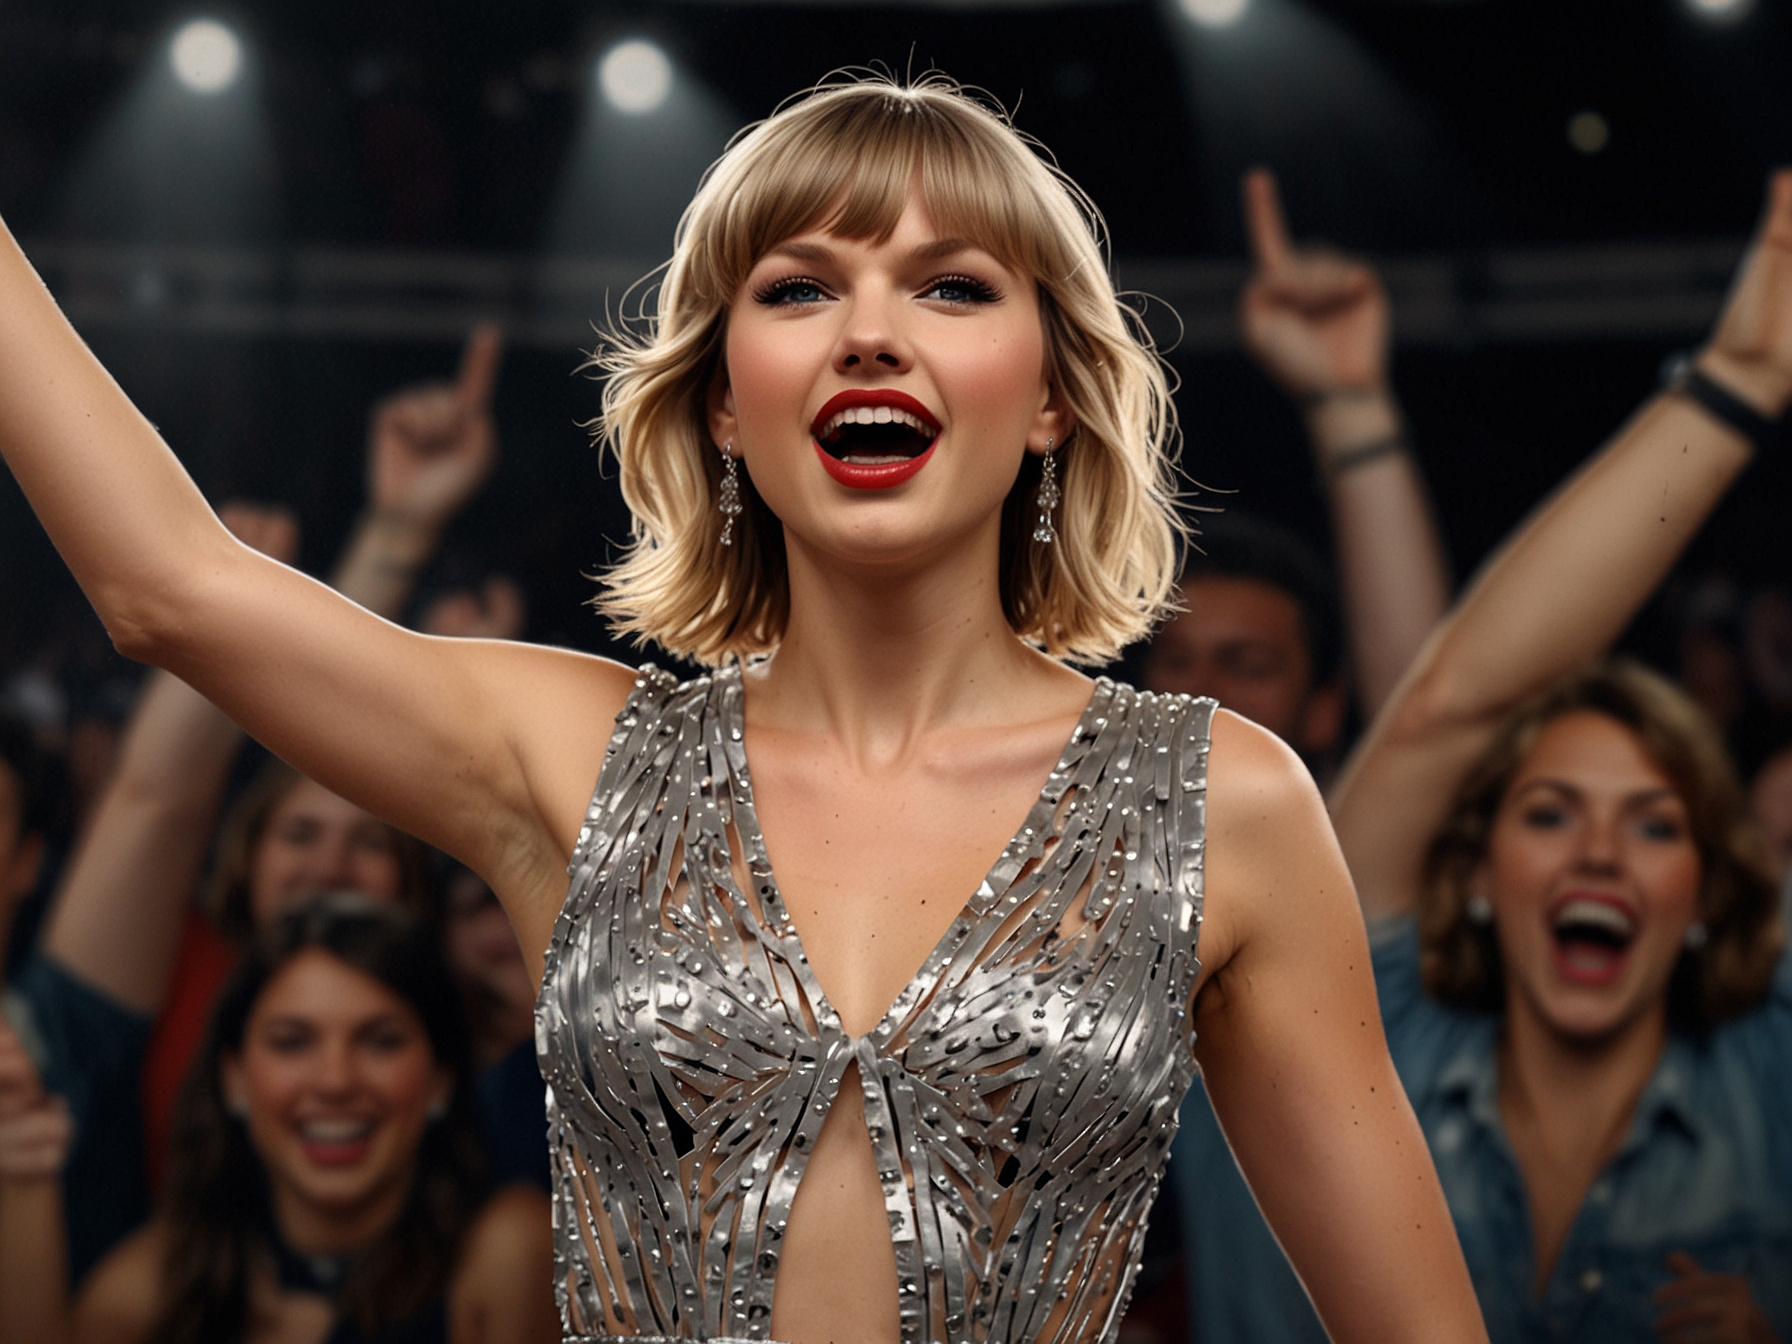 Taylor Swift on stage in London, mimicking Travis Kelce's iconic bow and arrow entrance move, capturing the audience's excitement and celebrating their relationship.